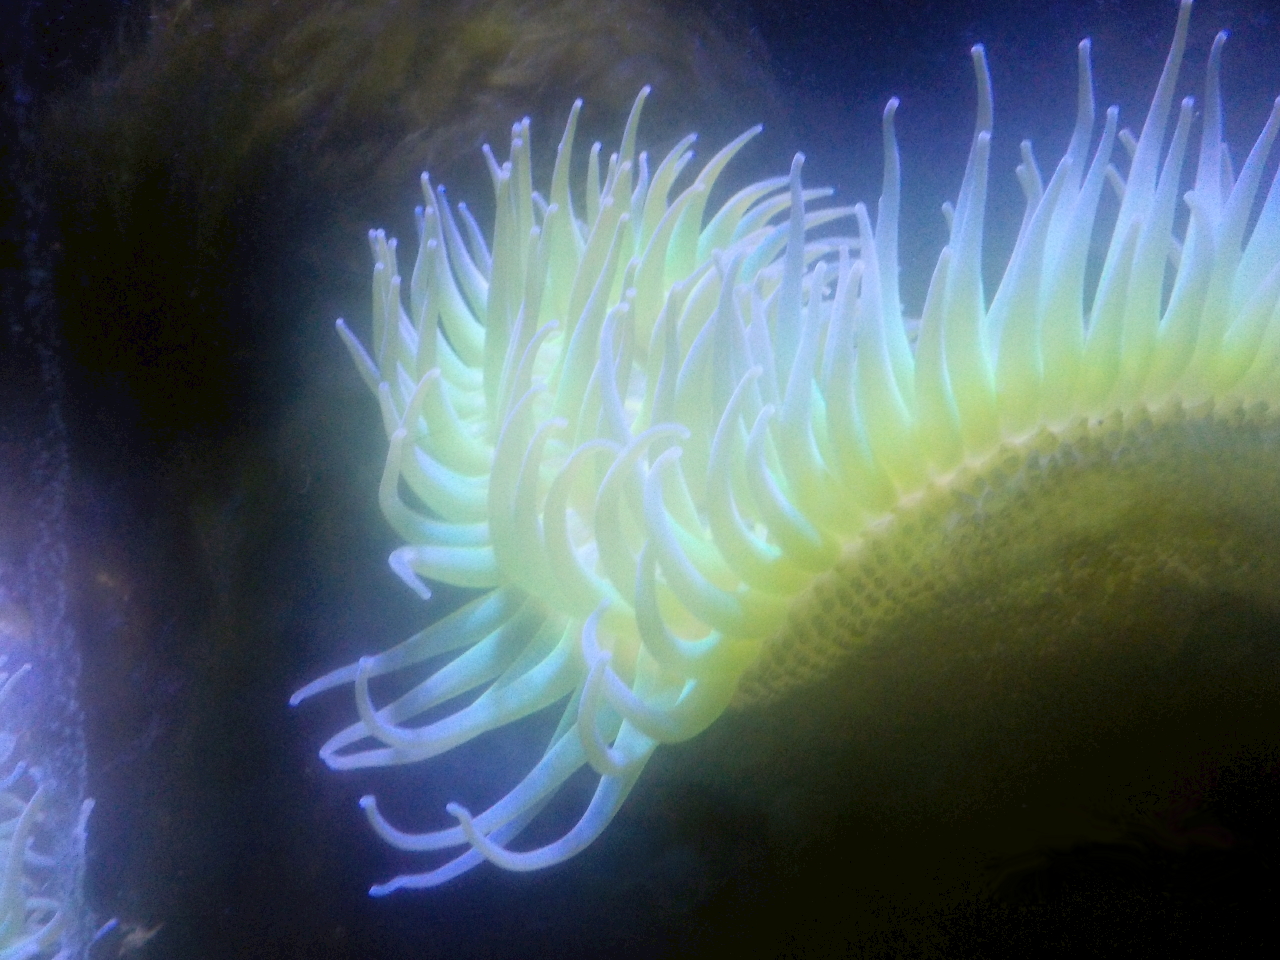 The Winner of the Underwater category is “Light Up” by J. Harris.